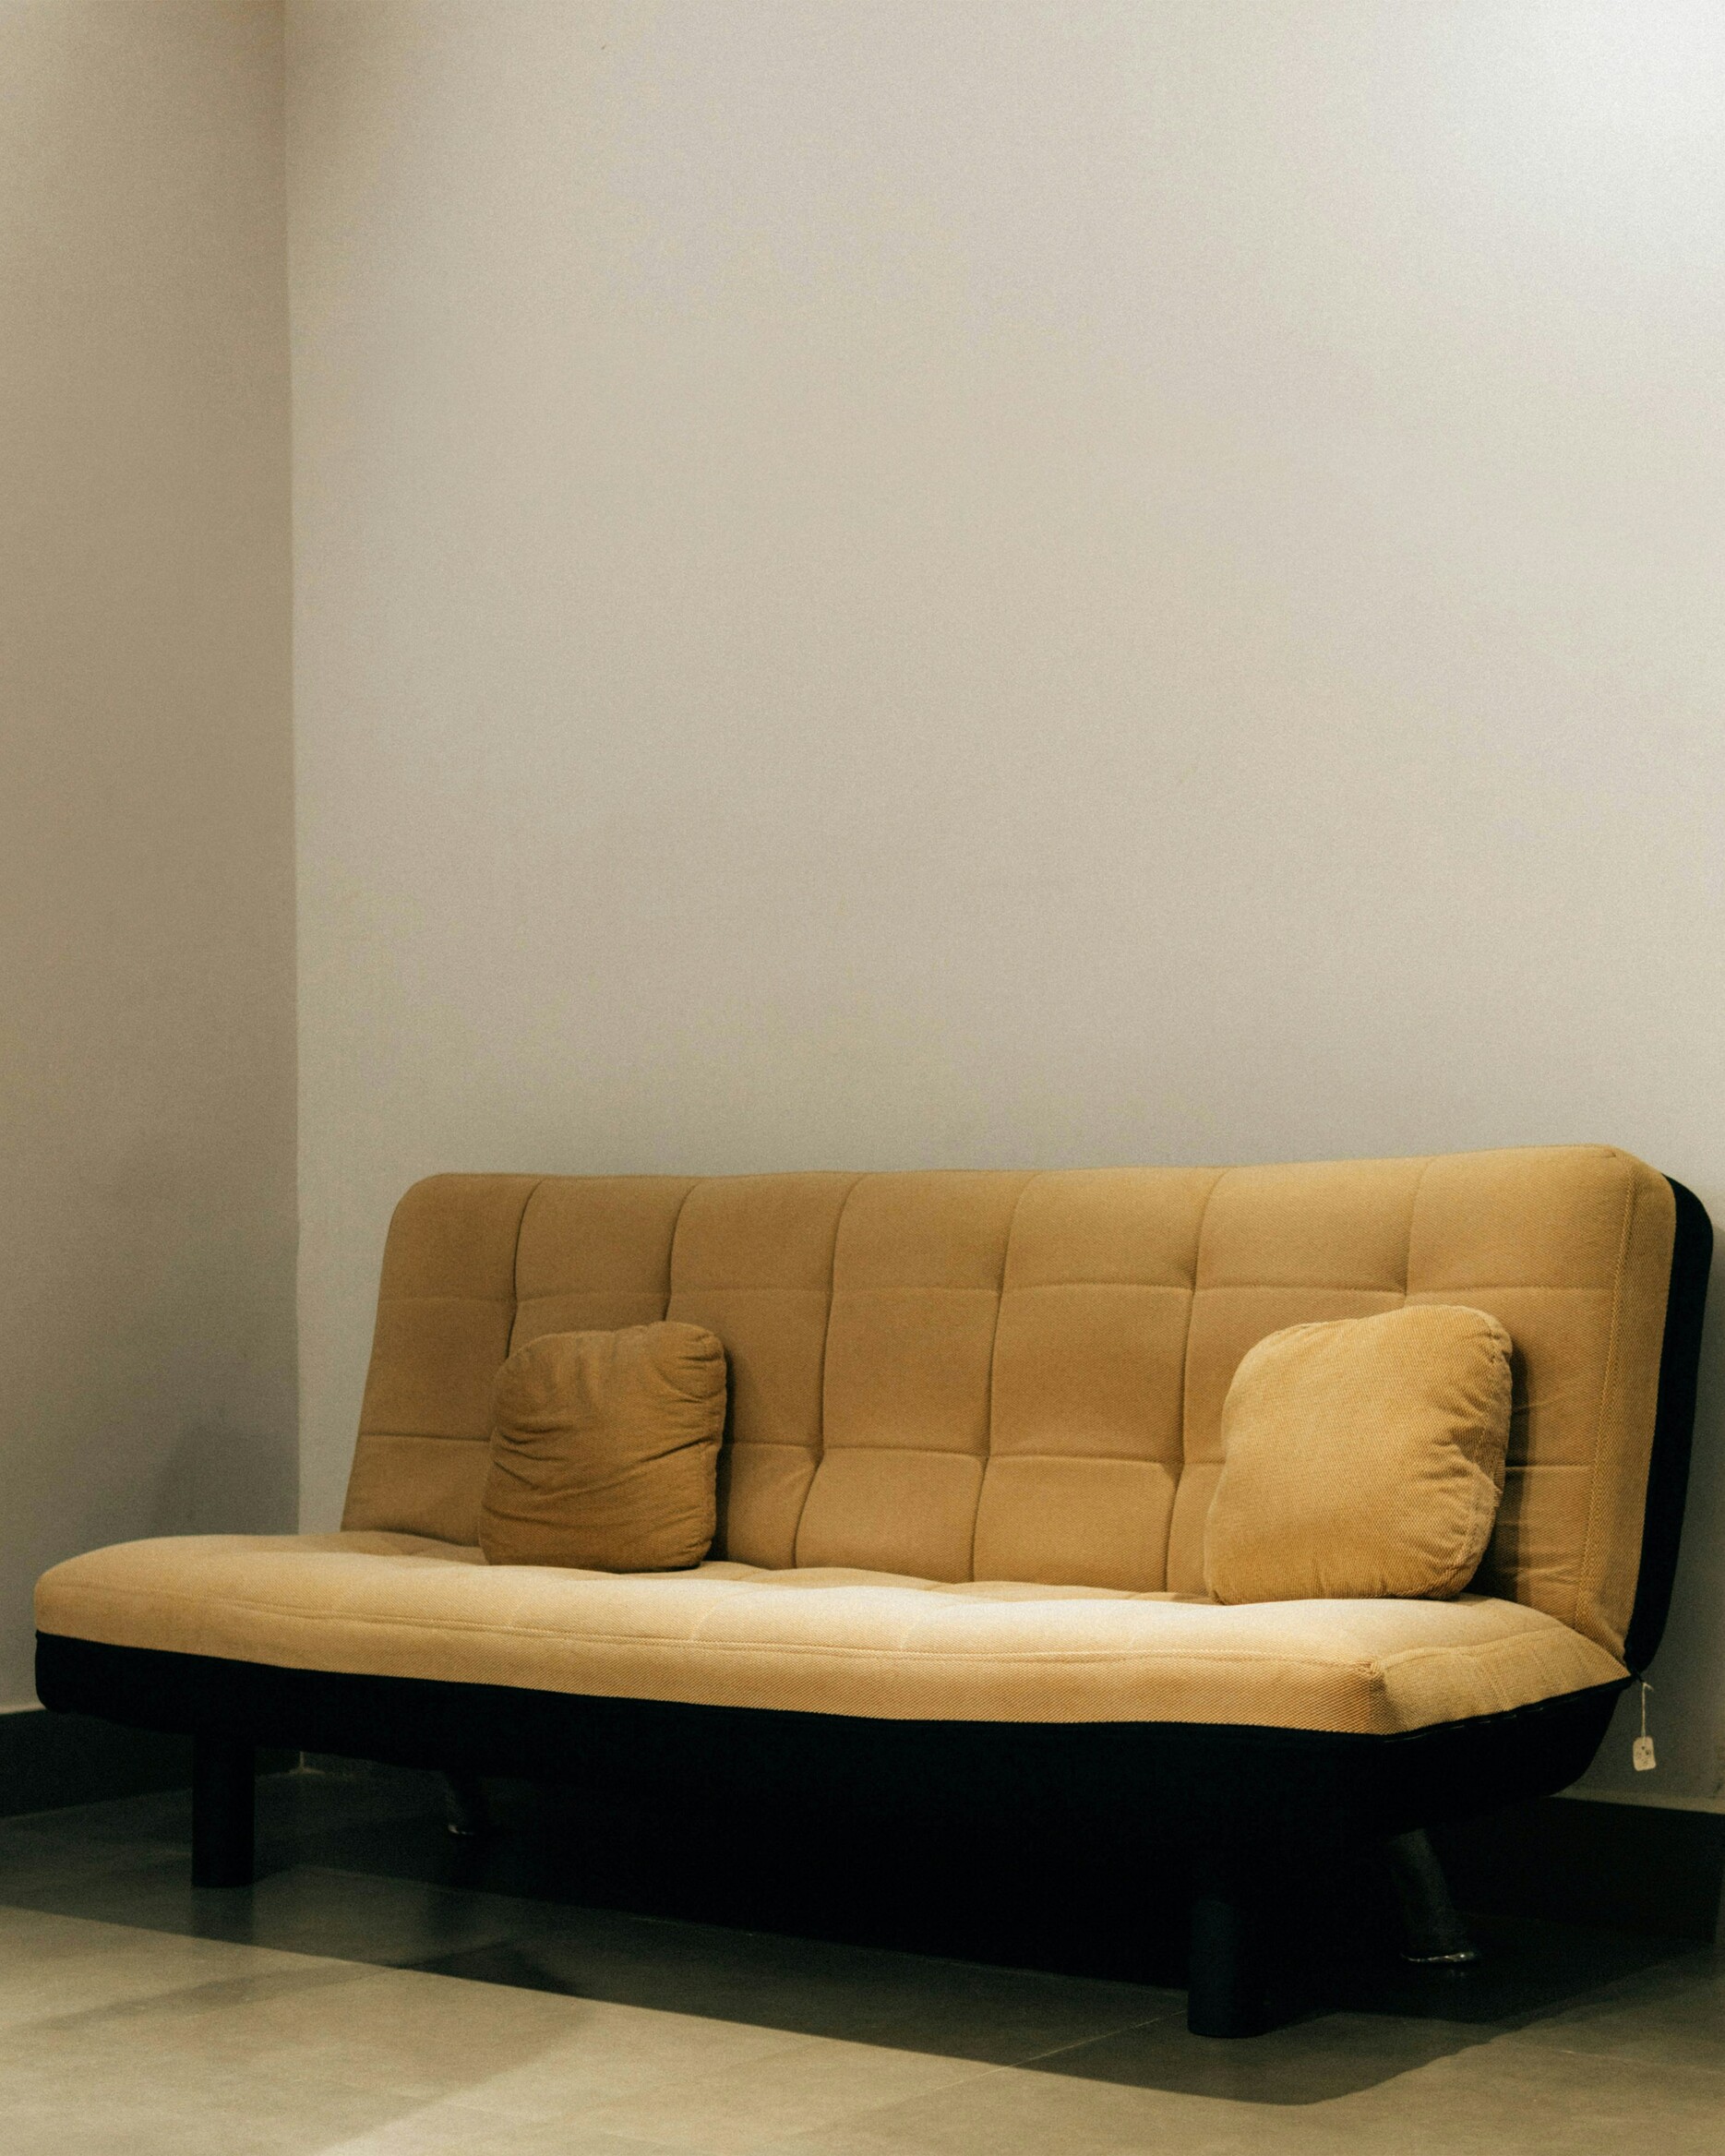 A couch in a room